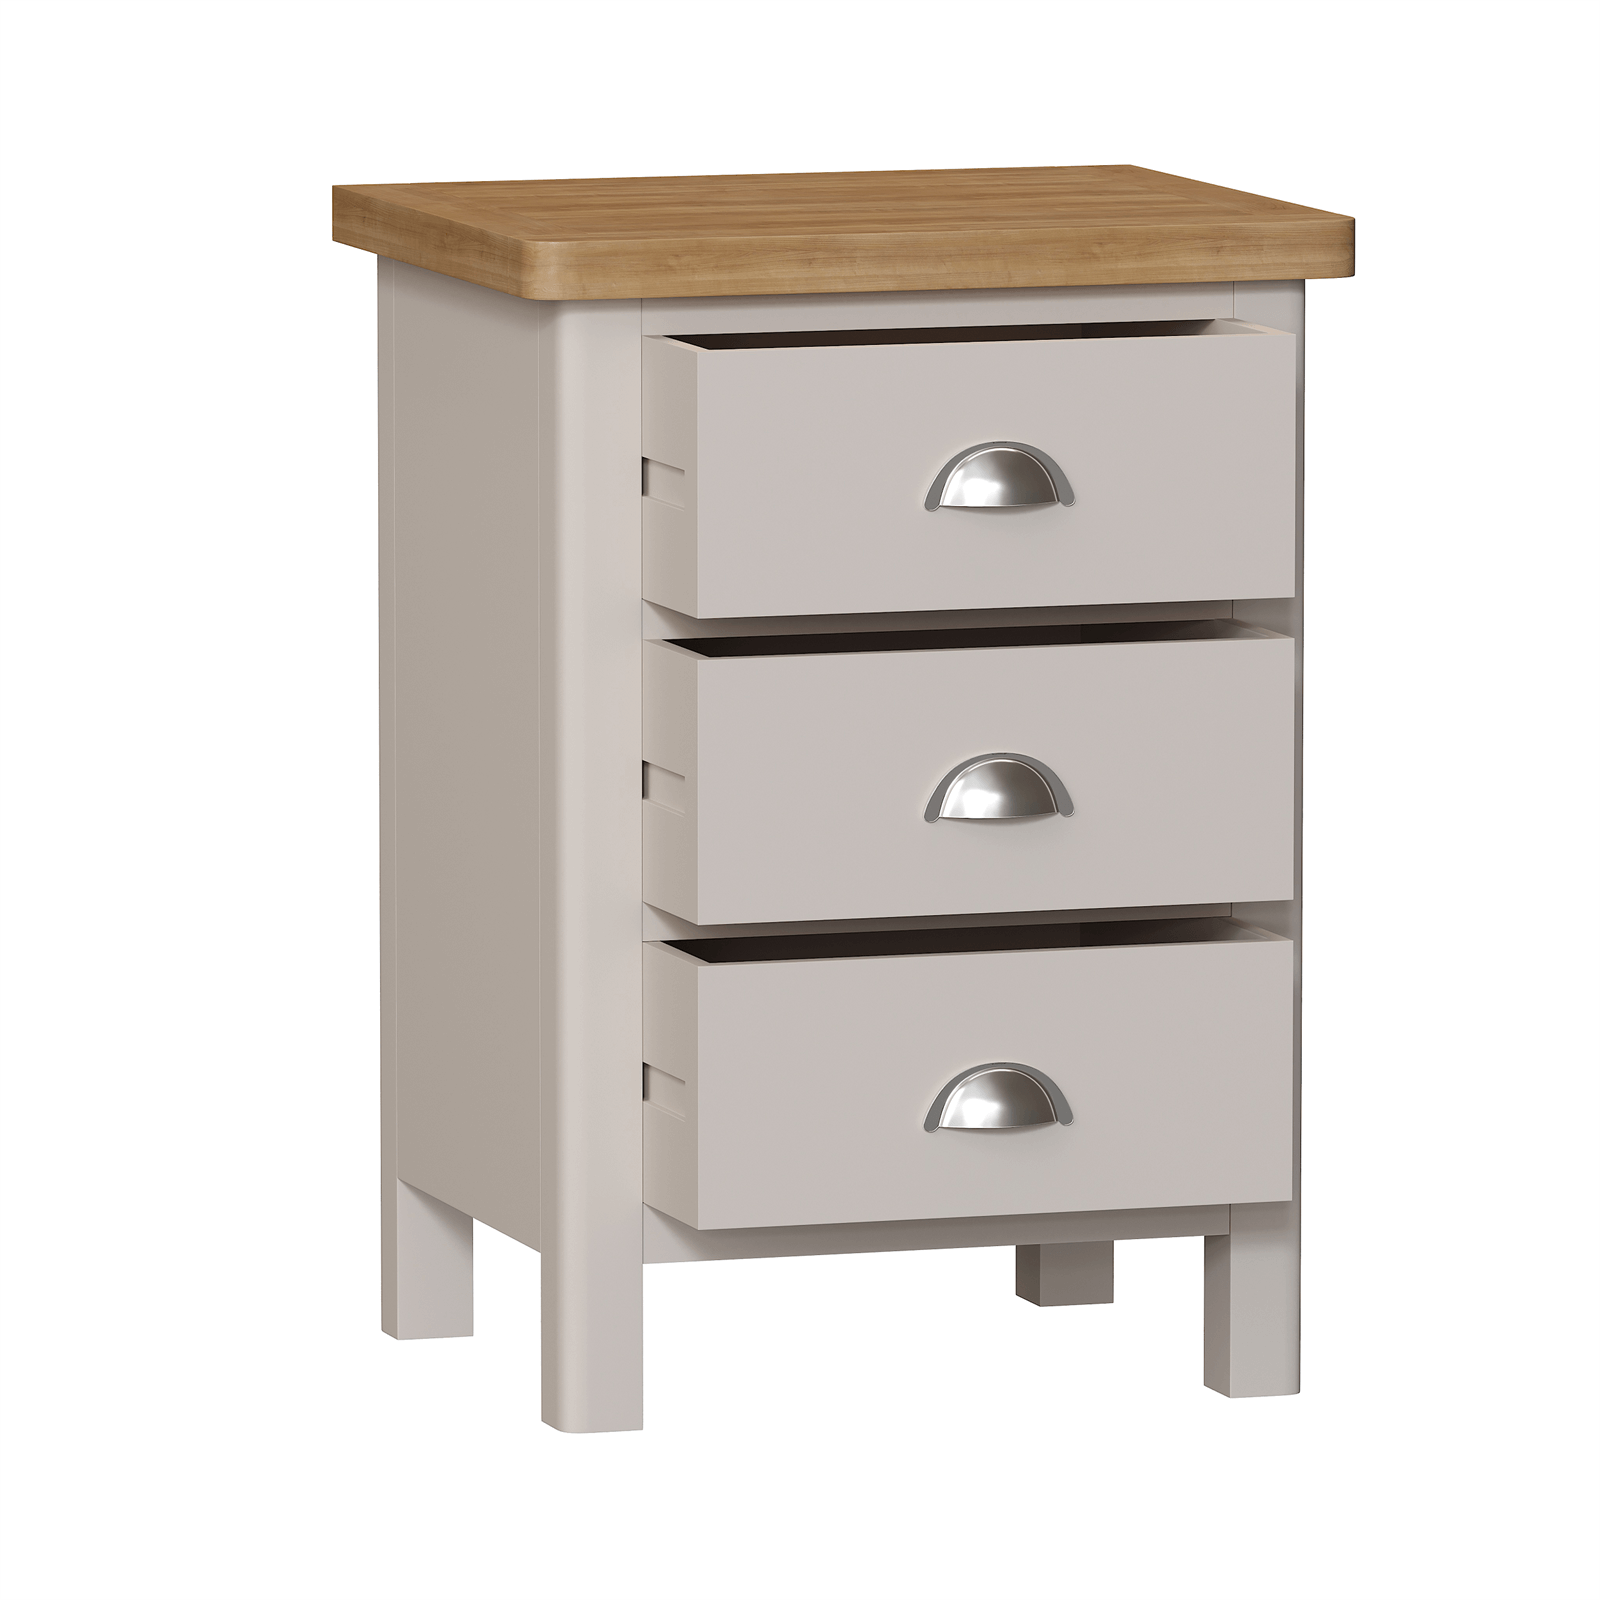 Padstow 3 Drawer Bedside Table - Truffle